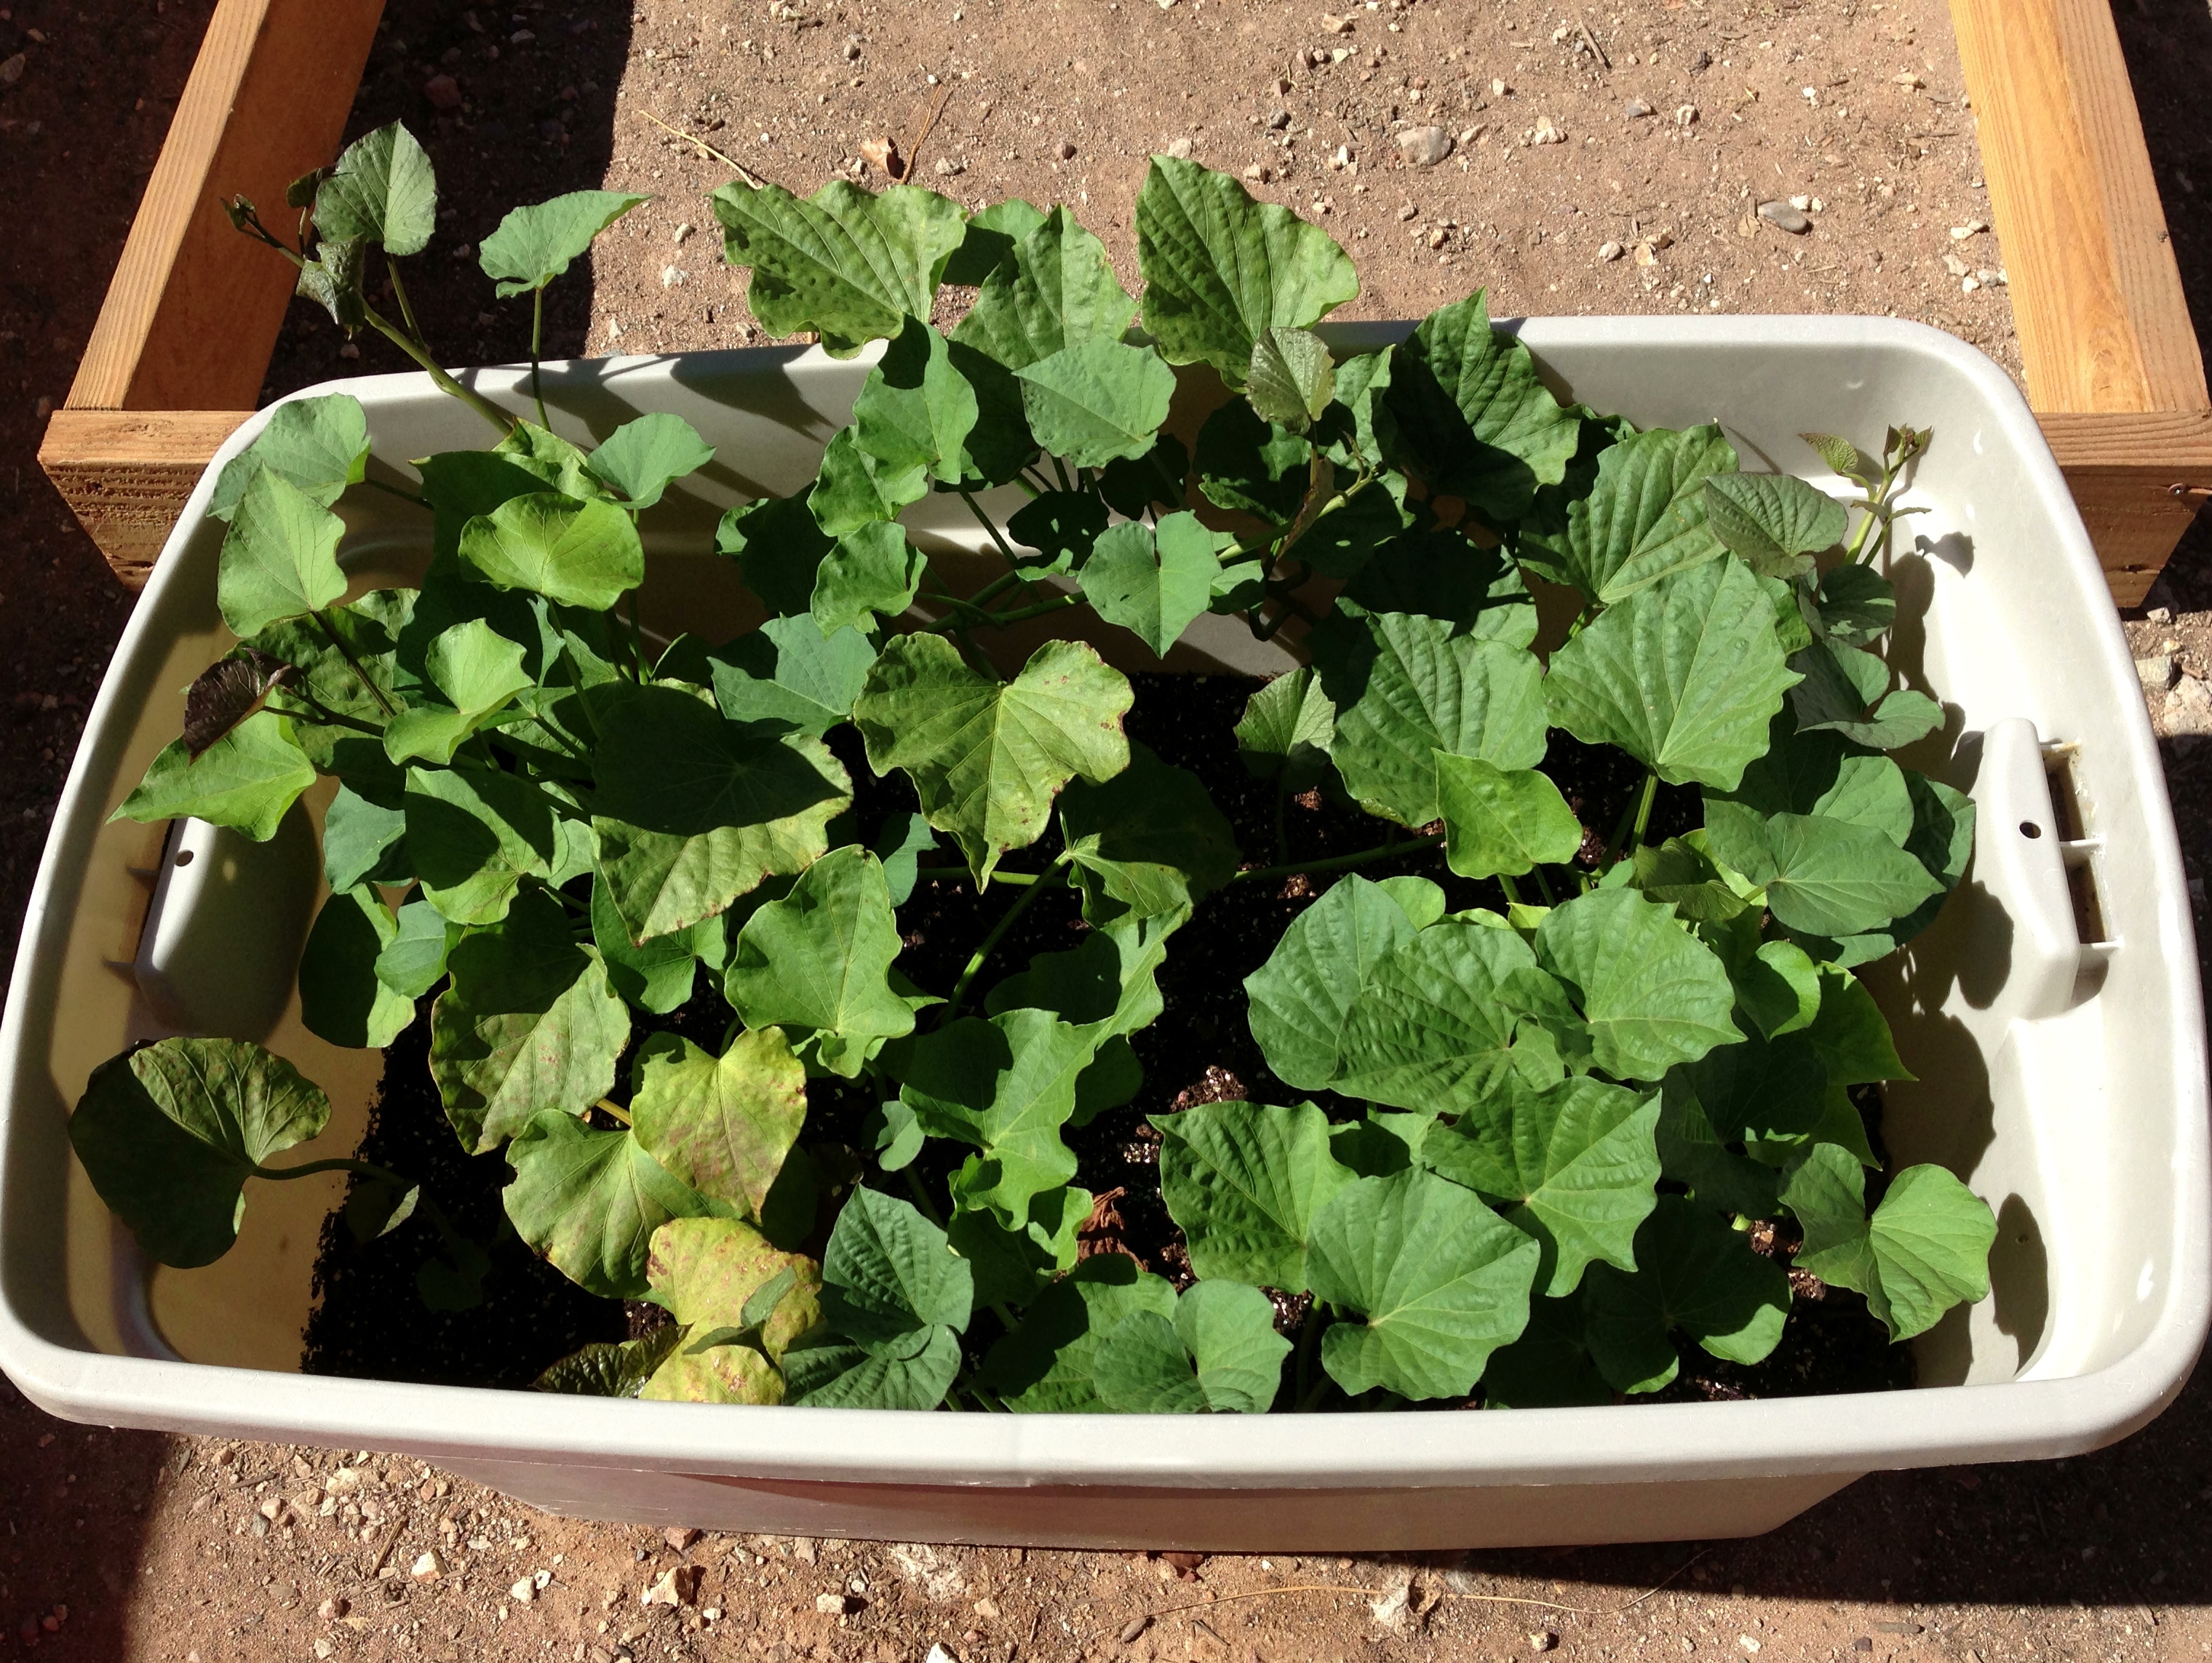 Sweet Potatoes growing in a rubber maid tub.  Should be harvesting these at the end of the summer.